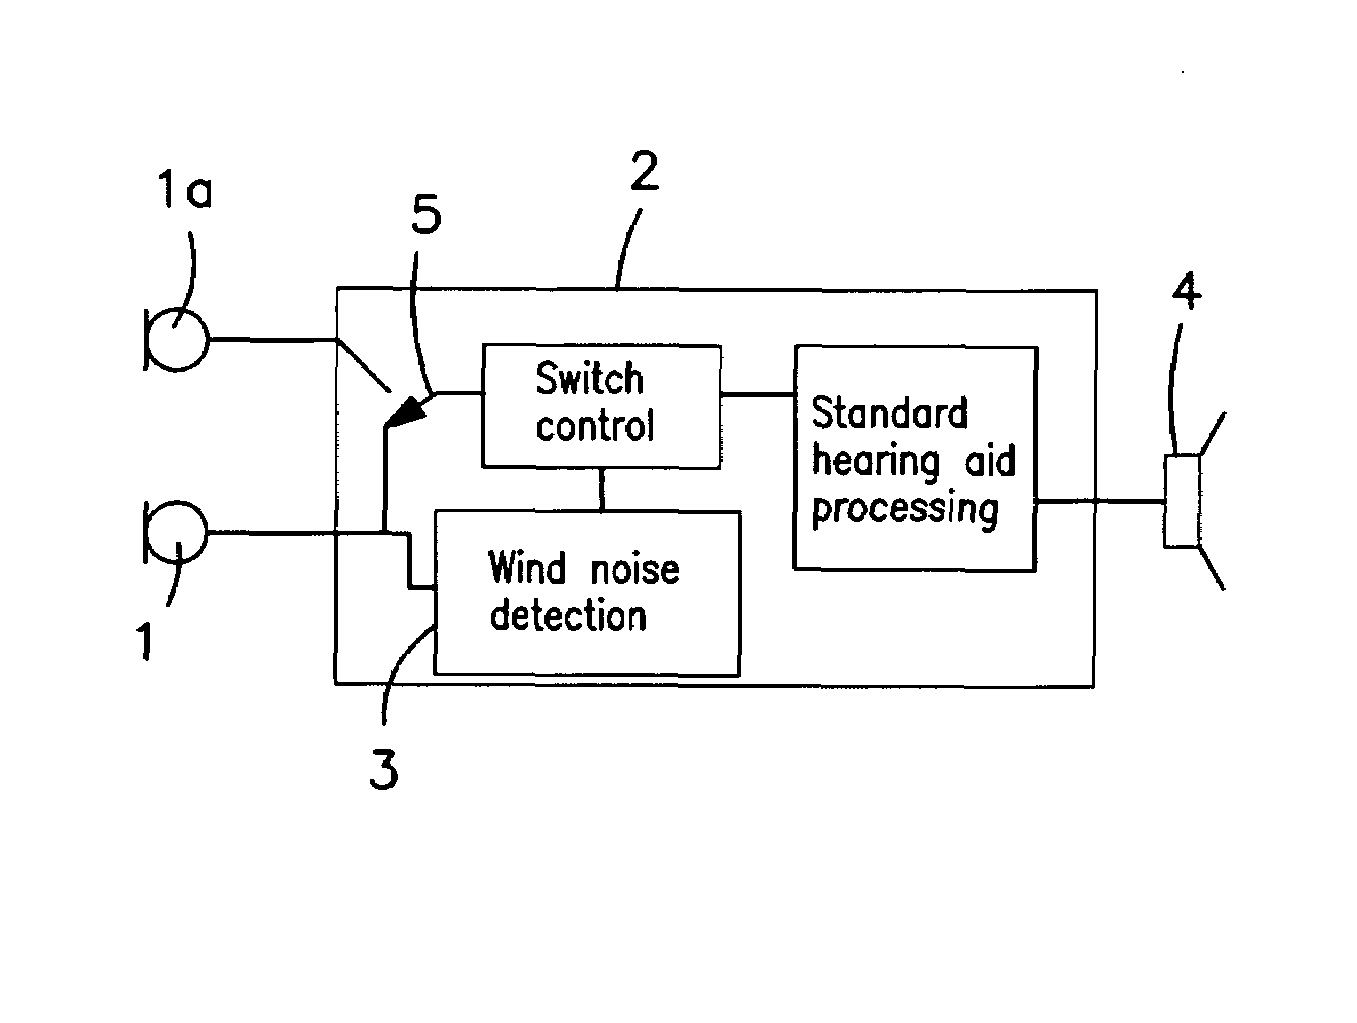 Wind noise insensitive hearing aid